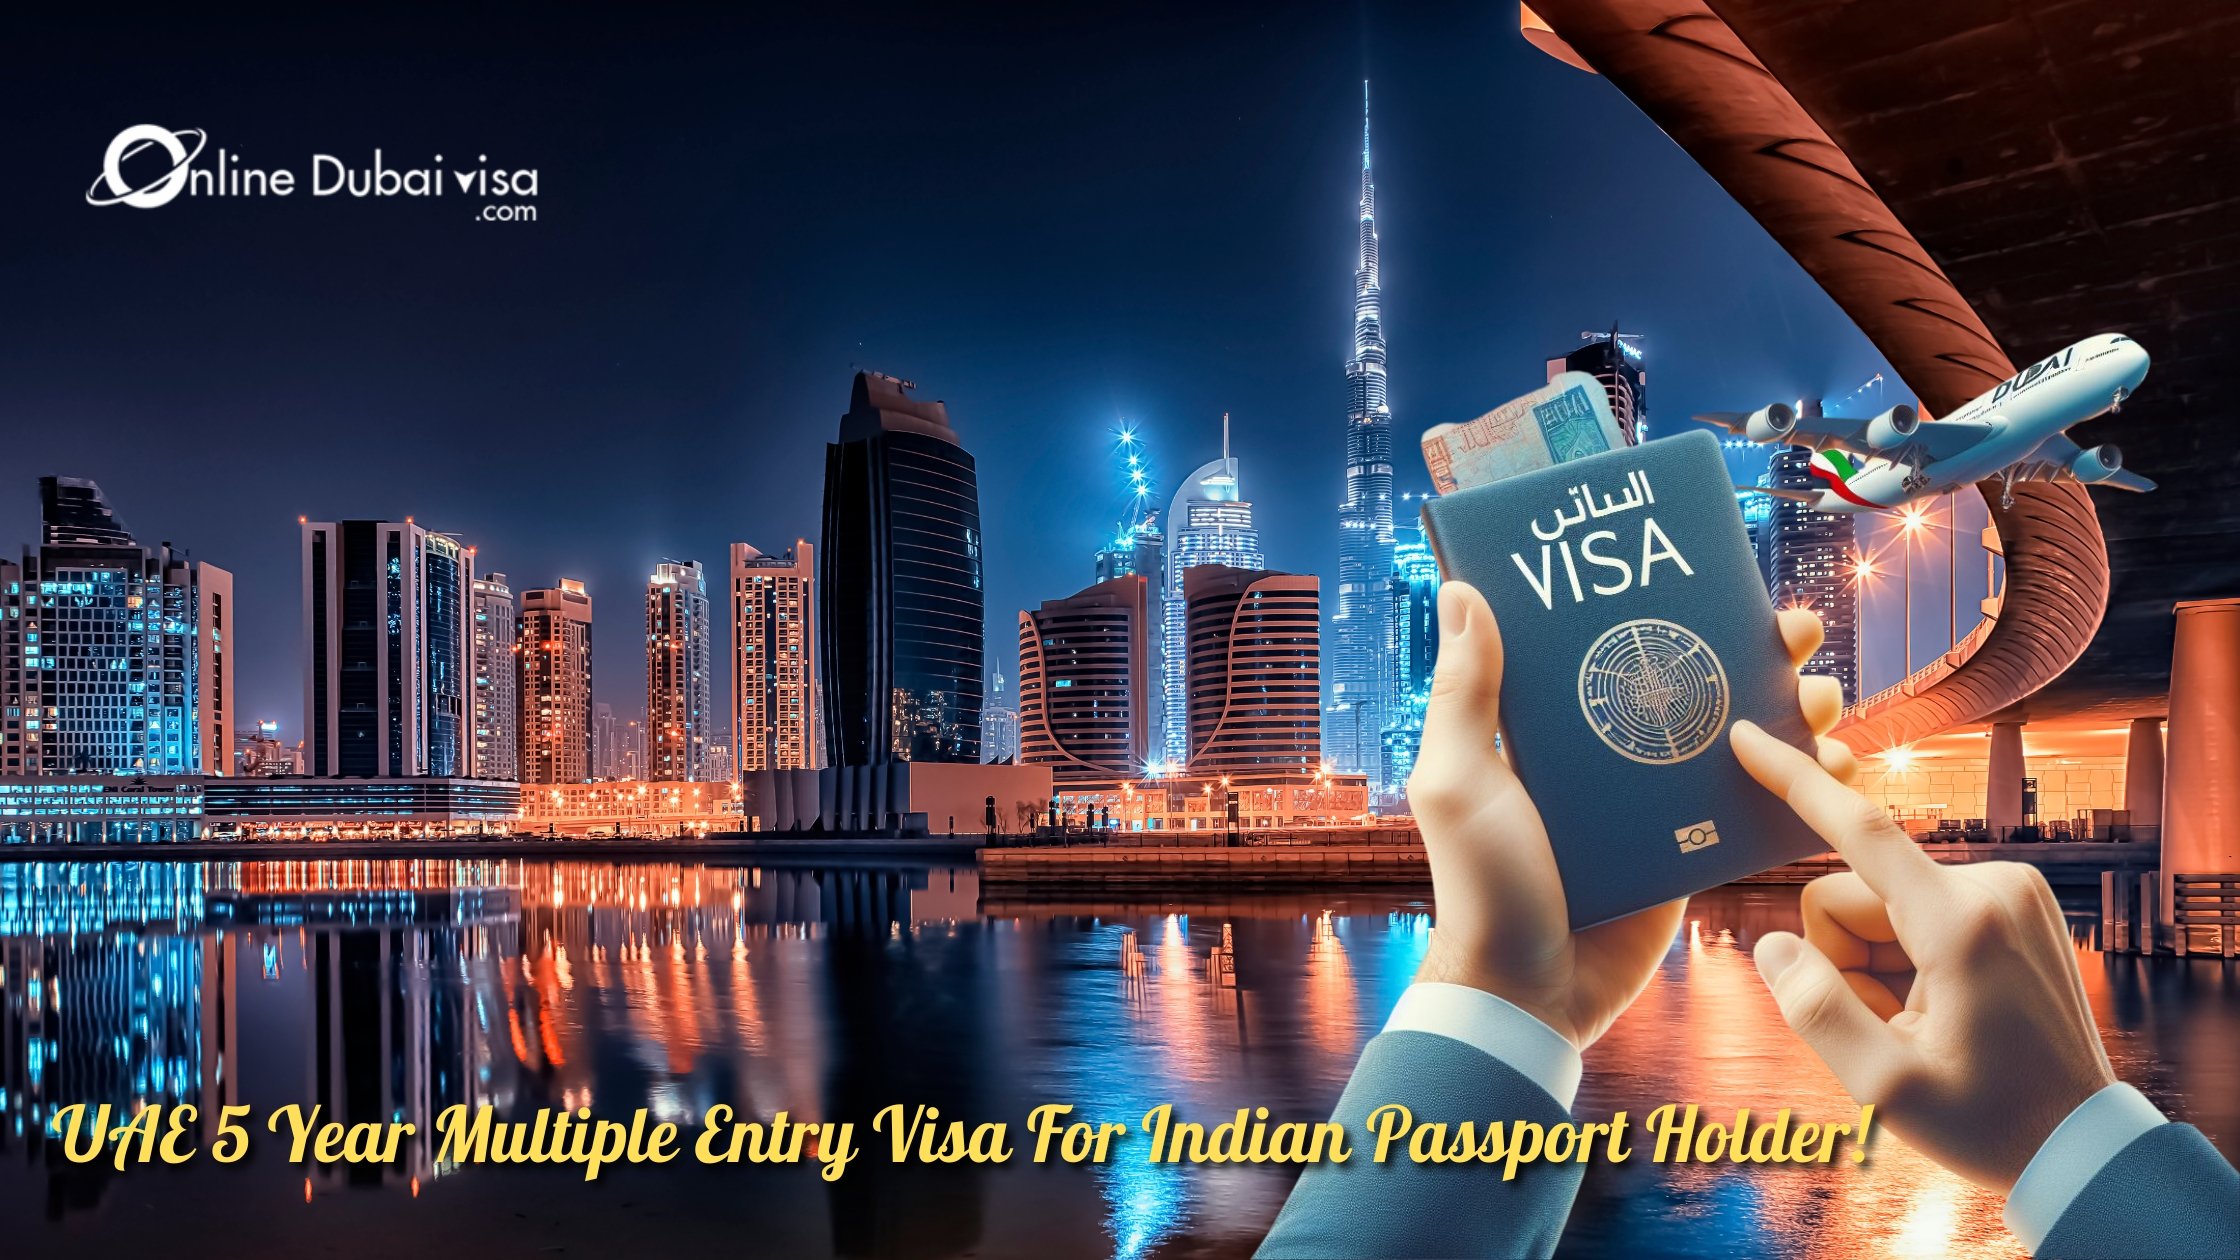 Apply 5 Year Multiple Entry Dubai Visa for Indian Passport Holders & Get fast Approval